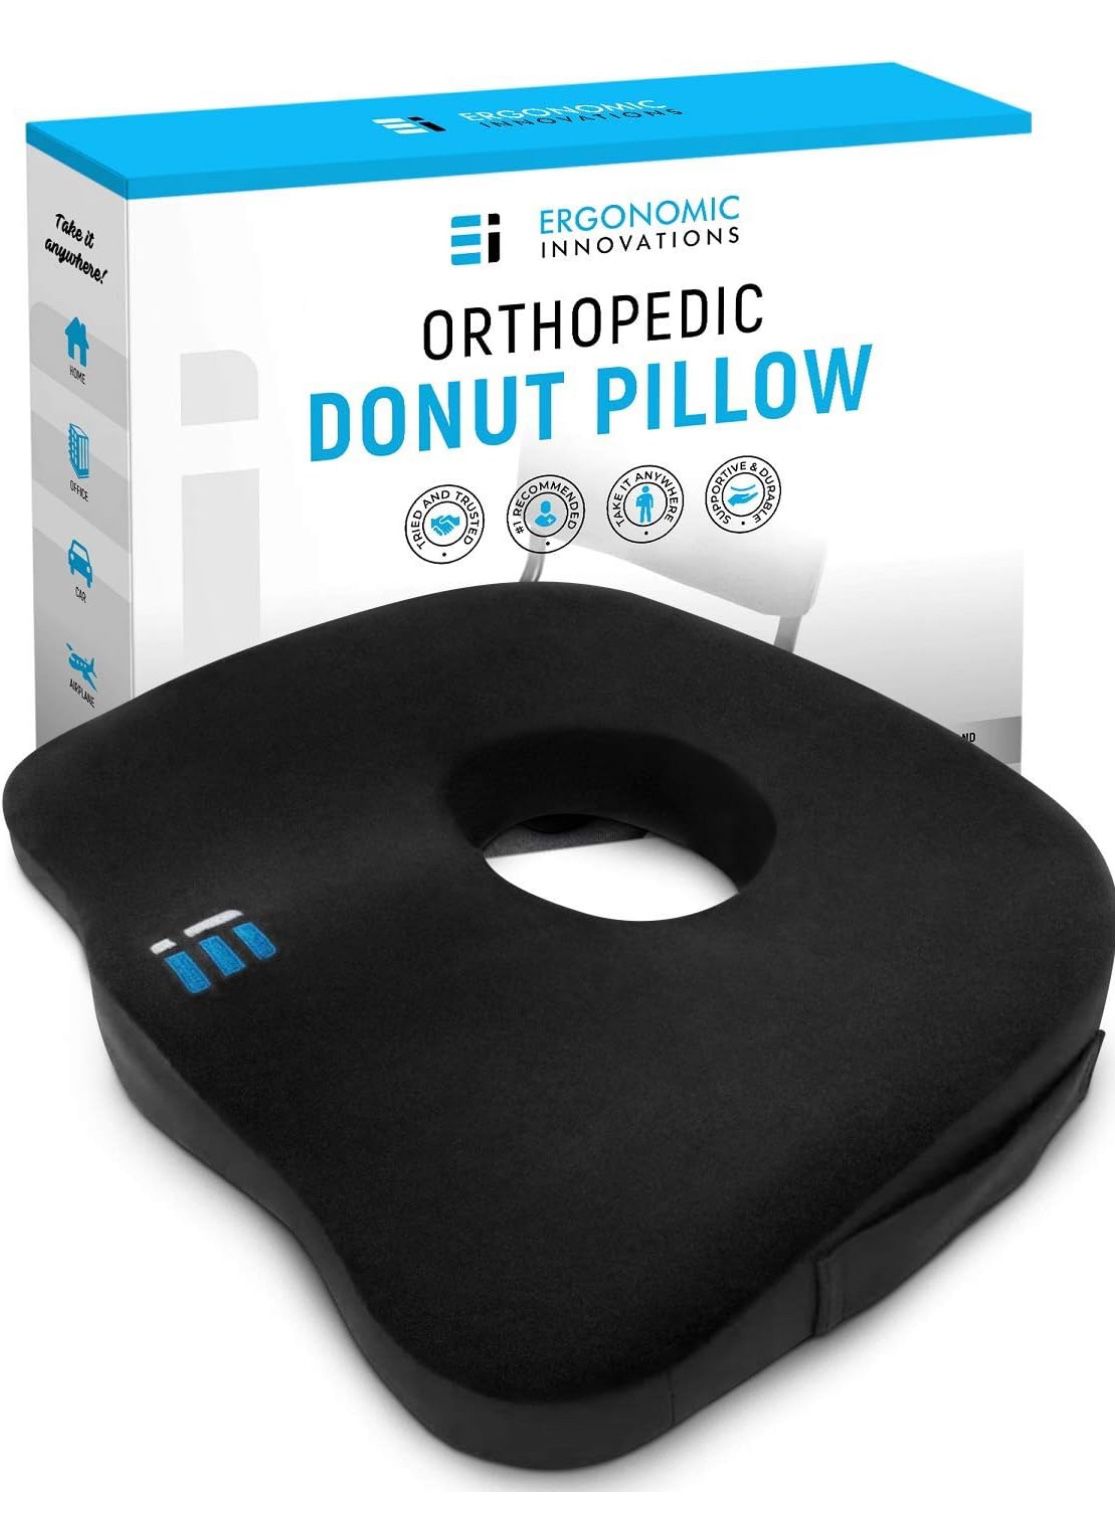 Ergonomic Innovations Orthopedic Donut Pillow: Memory Foam Chair Seat Cushion for Tailbone and Coccyx Pain, Sciatica, and Pressure Relief - Car, Desk,